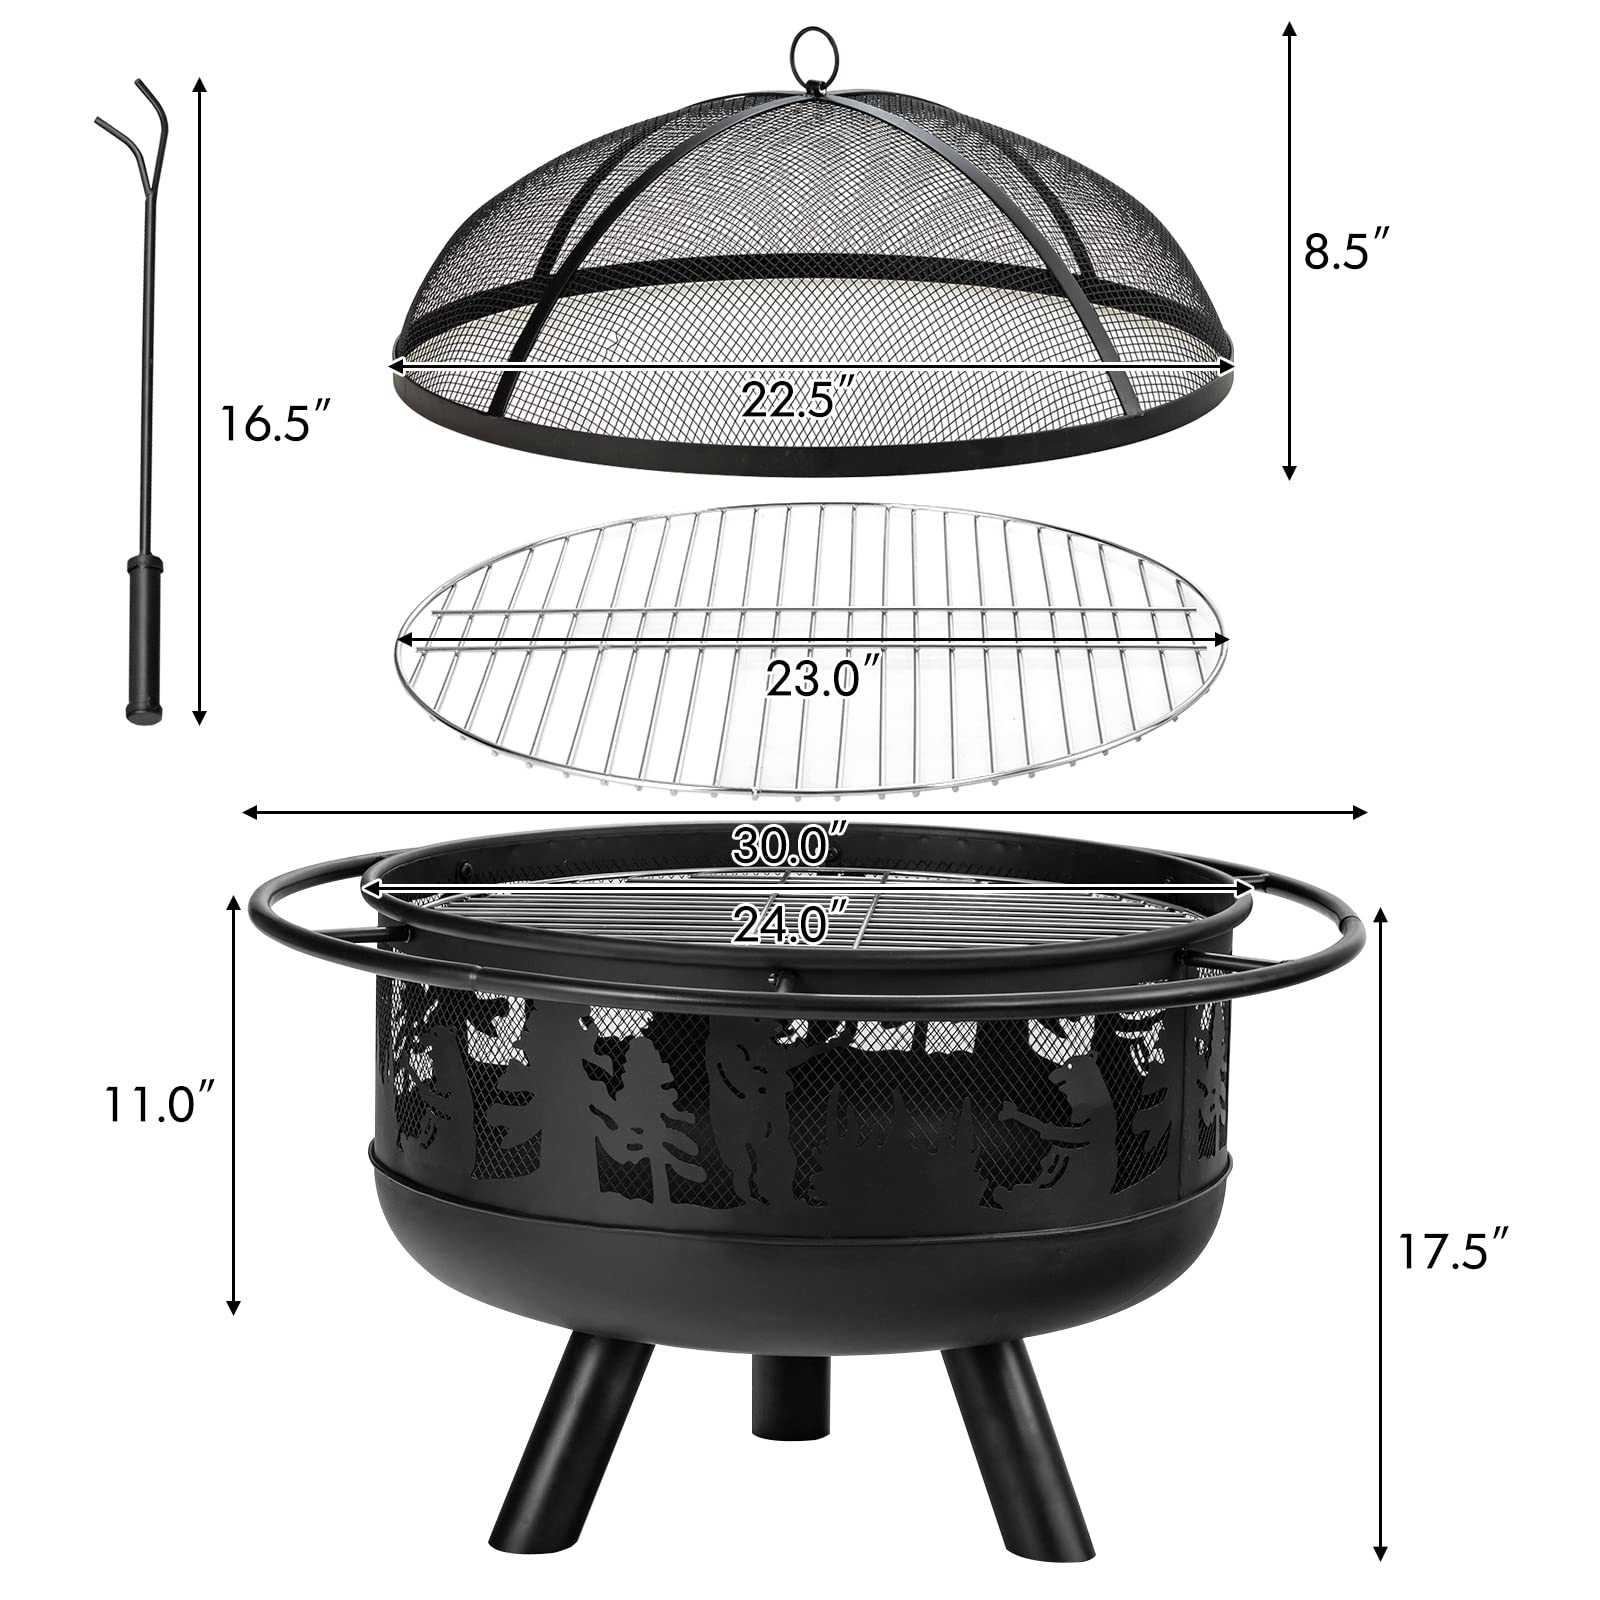 30 Inch Outdoor Wood Burning Fire Bowl with Fire Poker & Cooking Grill Grid